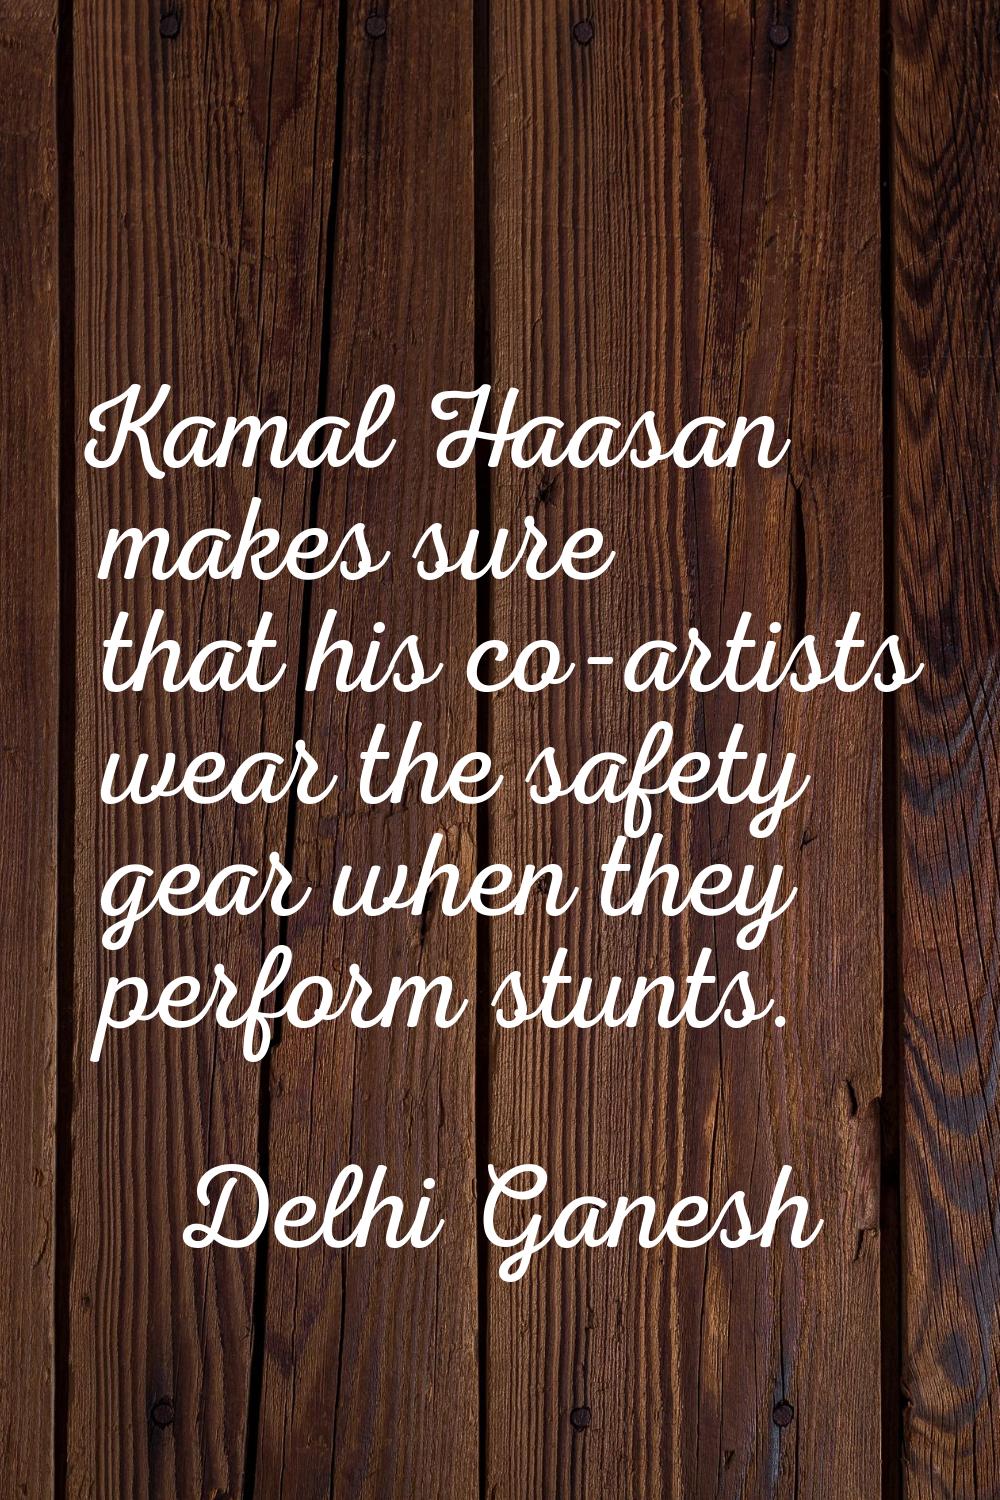 Kamal Haasan makes sure that his co-artists wear the safety gear when they perform stunts.